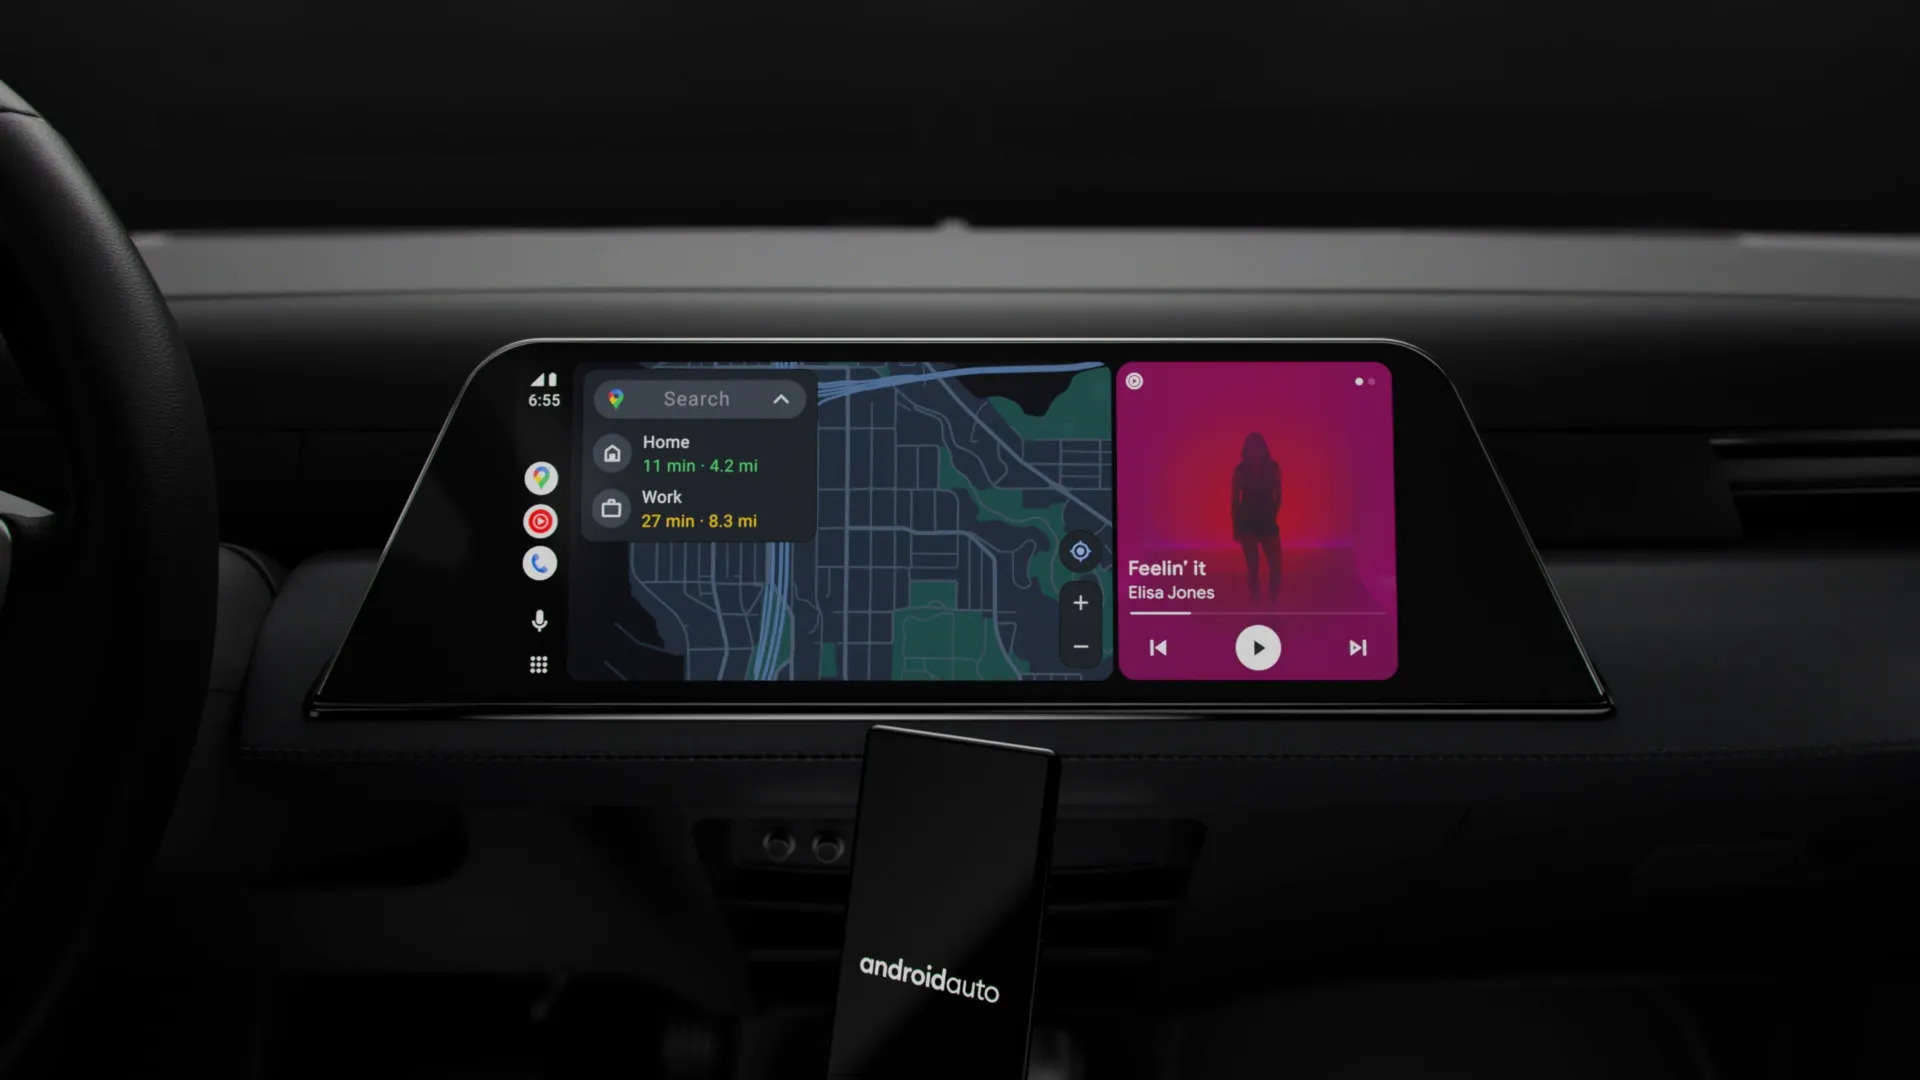  As per Google, Android Auto is compatible with all major car makers and the split screen layout is also adaptable to different screen sizes.